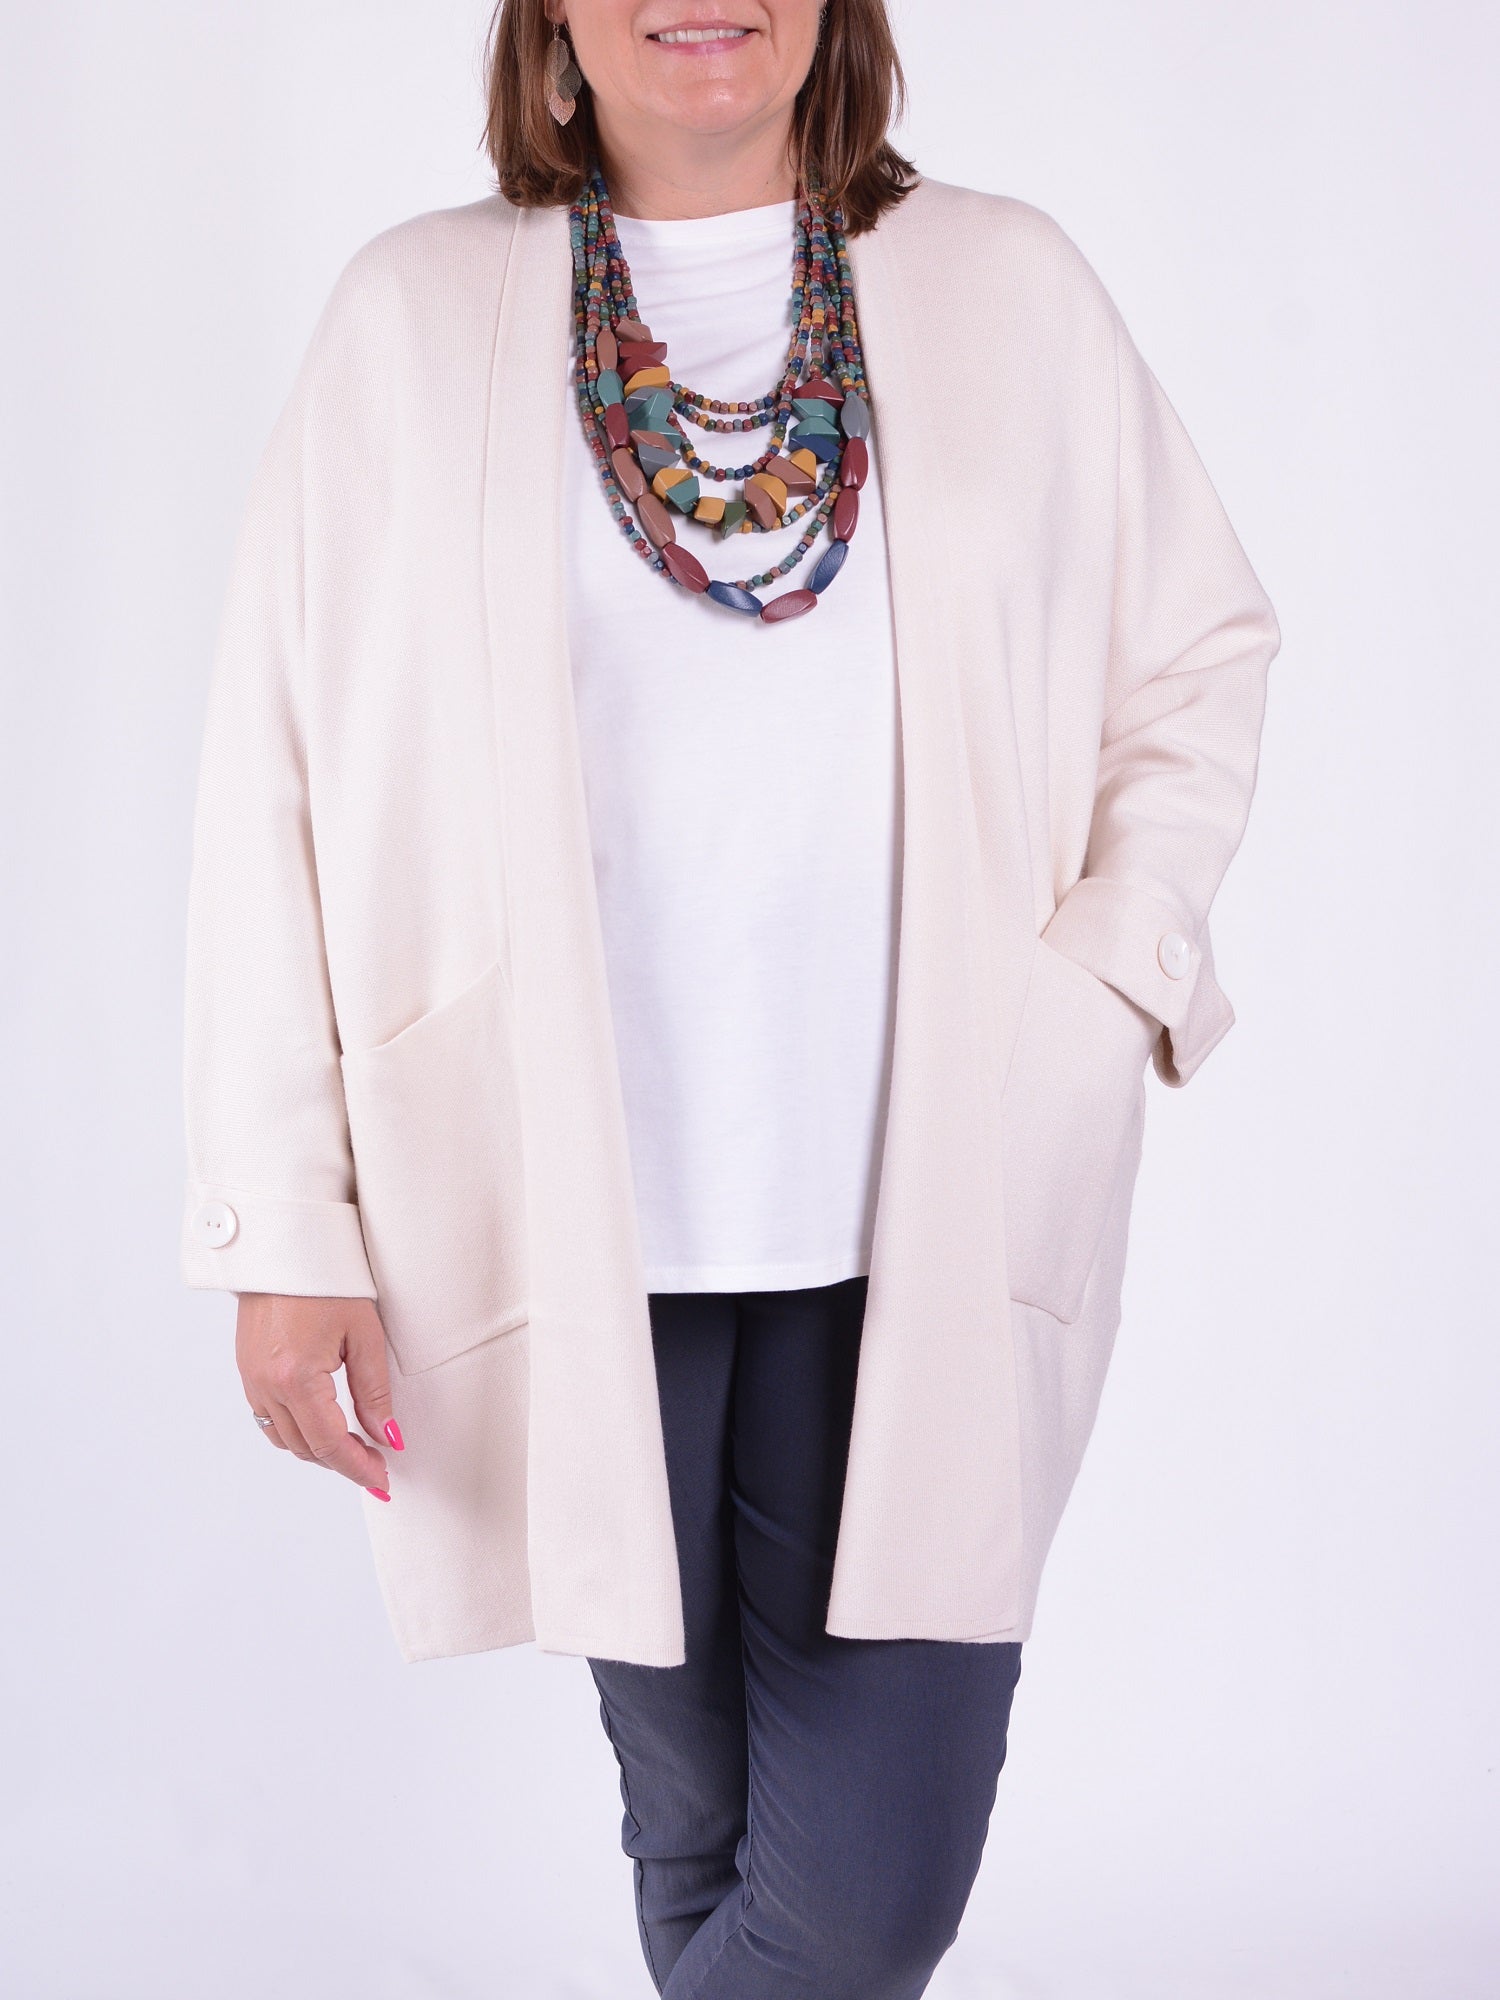 Lagenlook Open Front Cardigan - C2, Jumpers & Cardigans, Pure Plus Clothing, Lagenlook Clothing, Plus Size Fashion, Over 50 Fashion